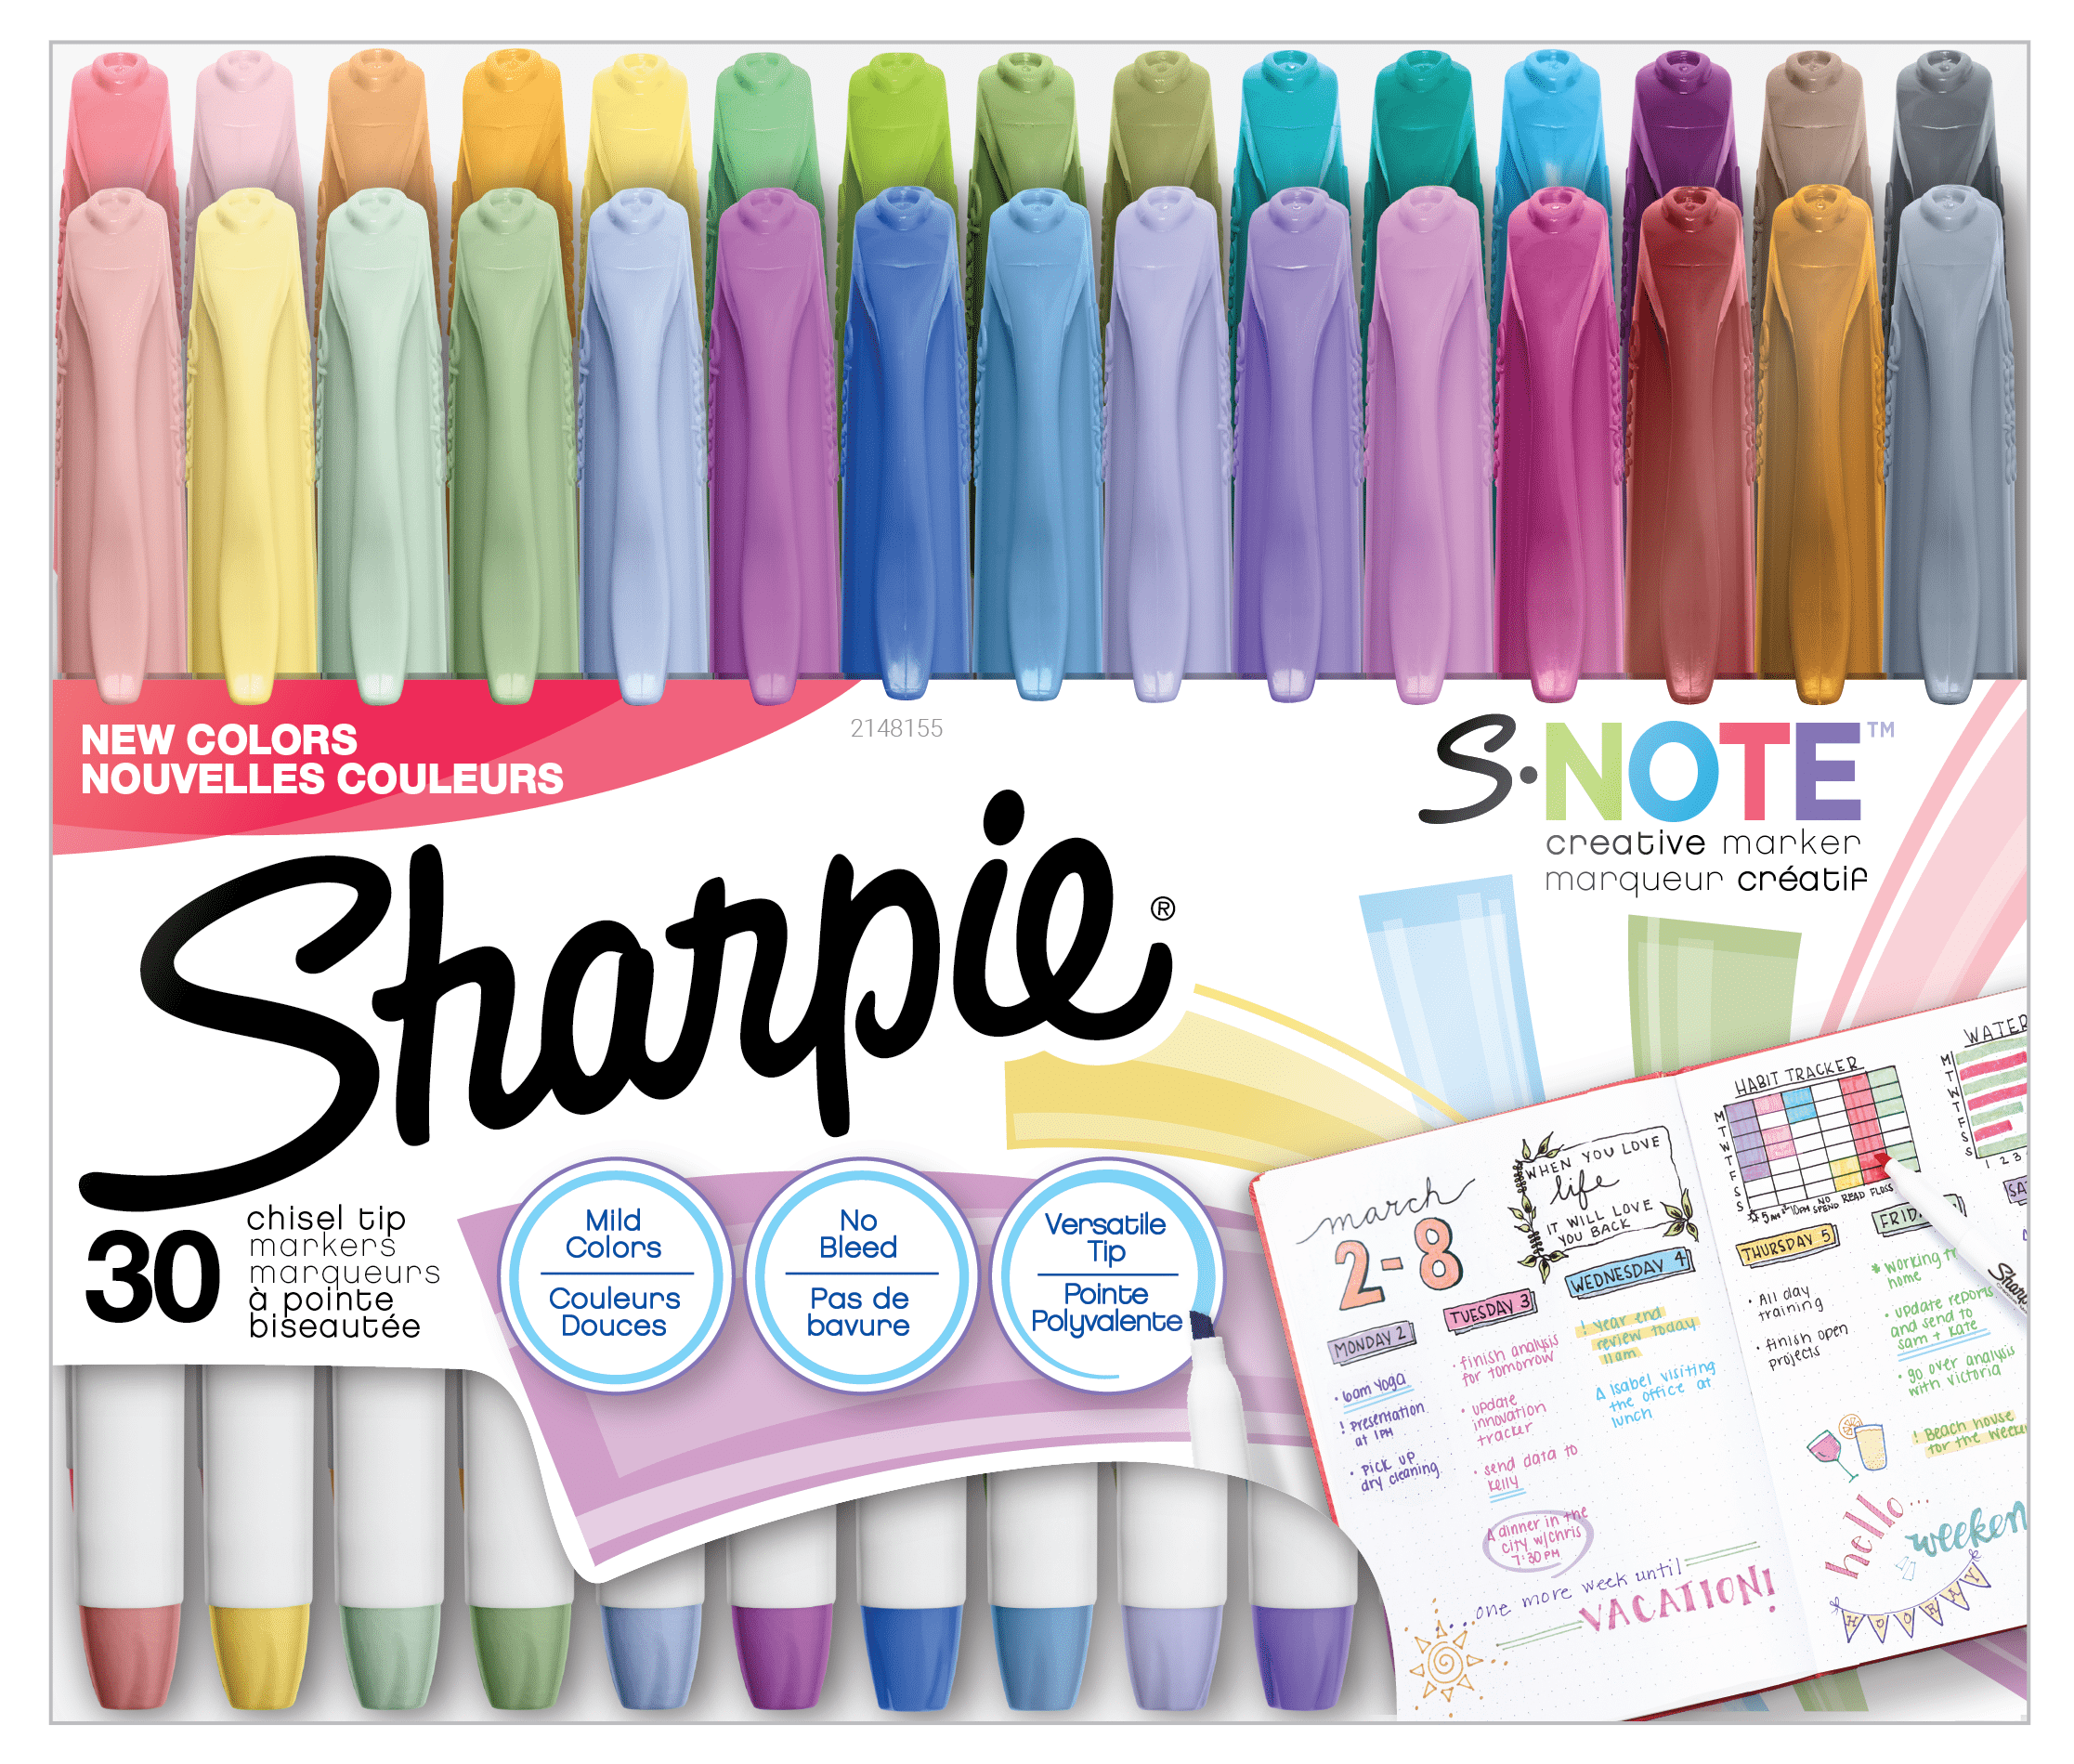 SHARPIE S-NOTE DUO TIP HIGHLIGHTER ASRT - 8CT